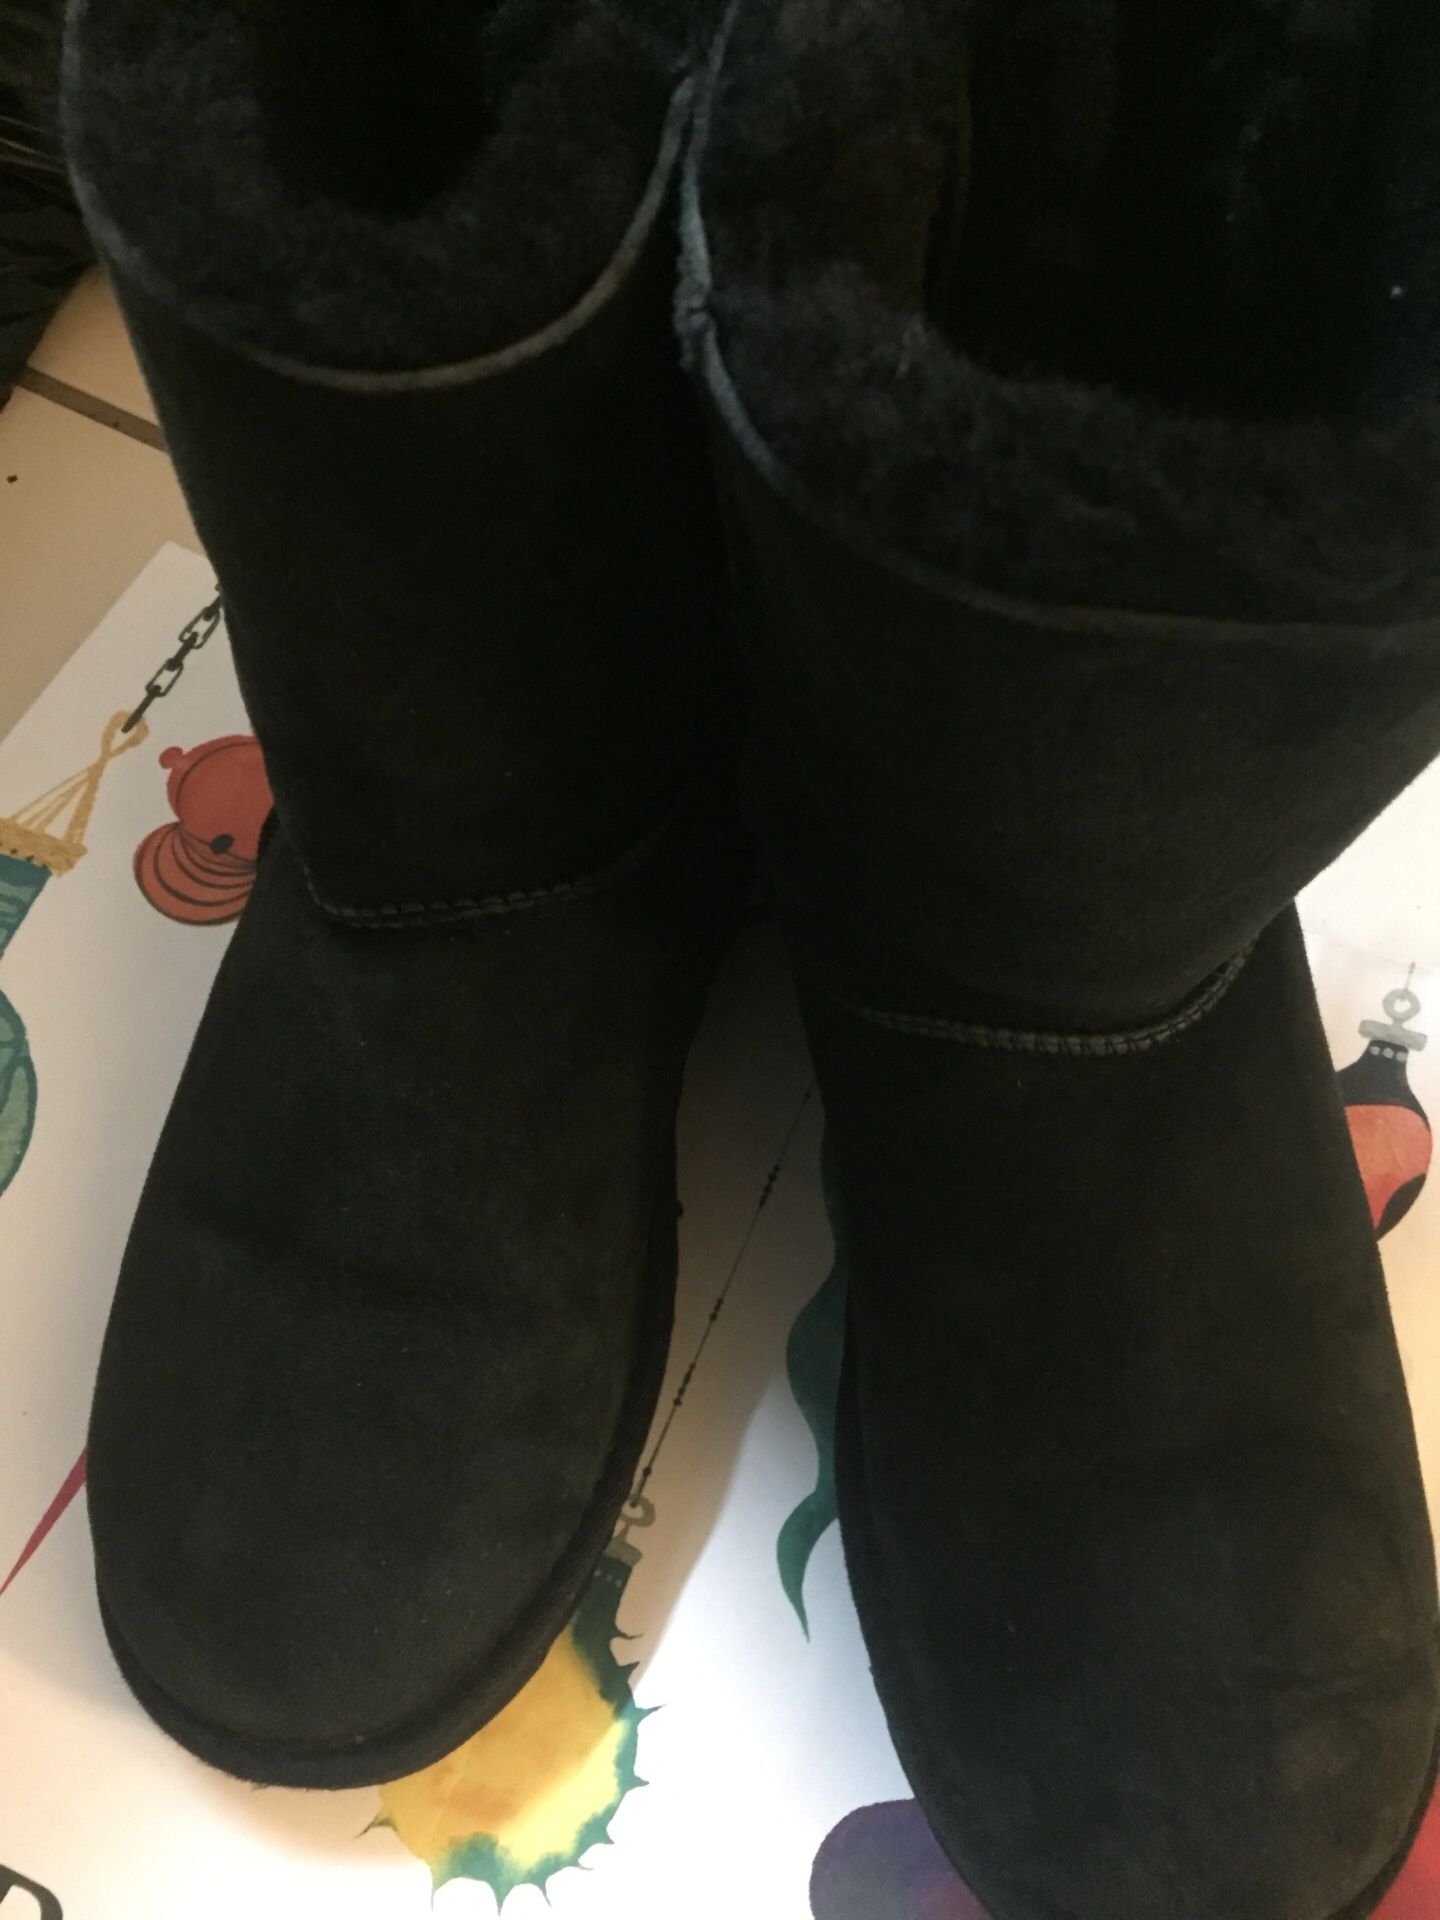 UGG Boots black size 7 bailey Bow